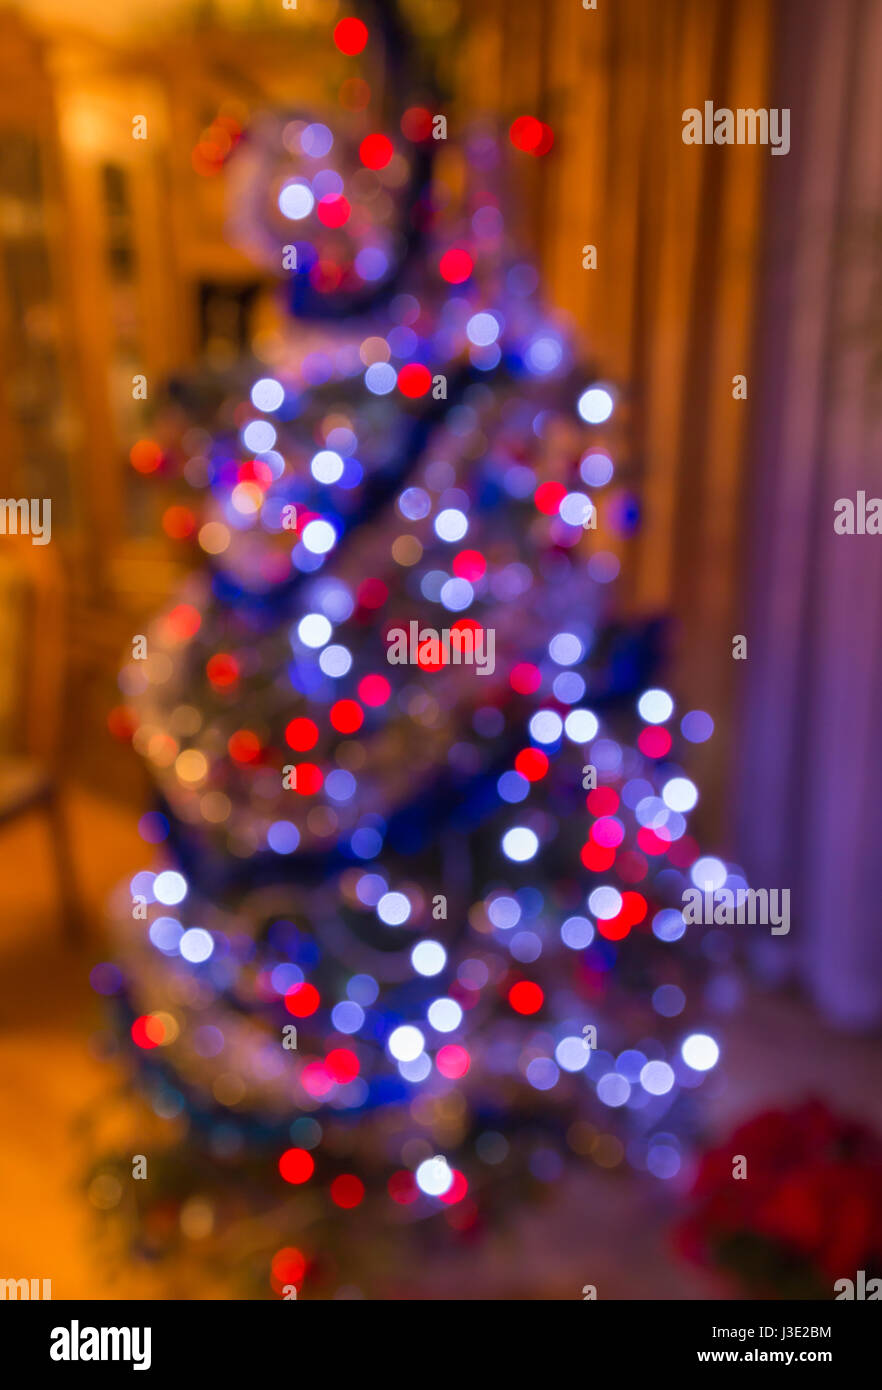 Blurred view of a lights on christmas tree Stock Photo